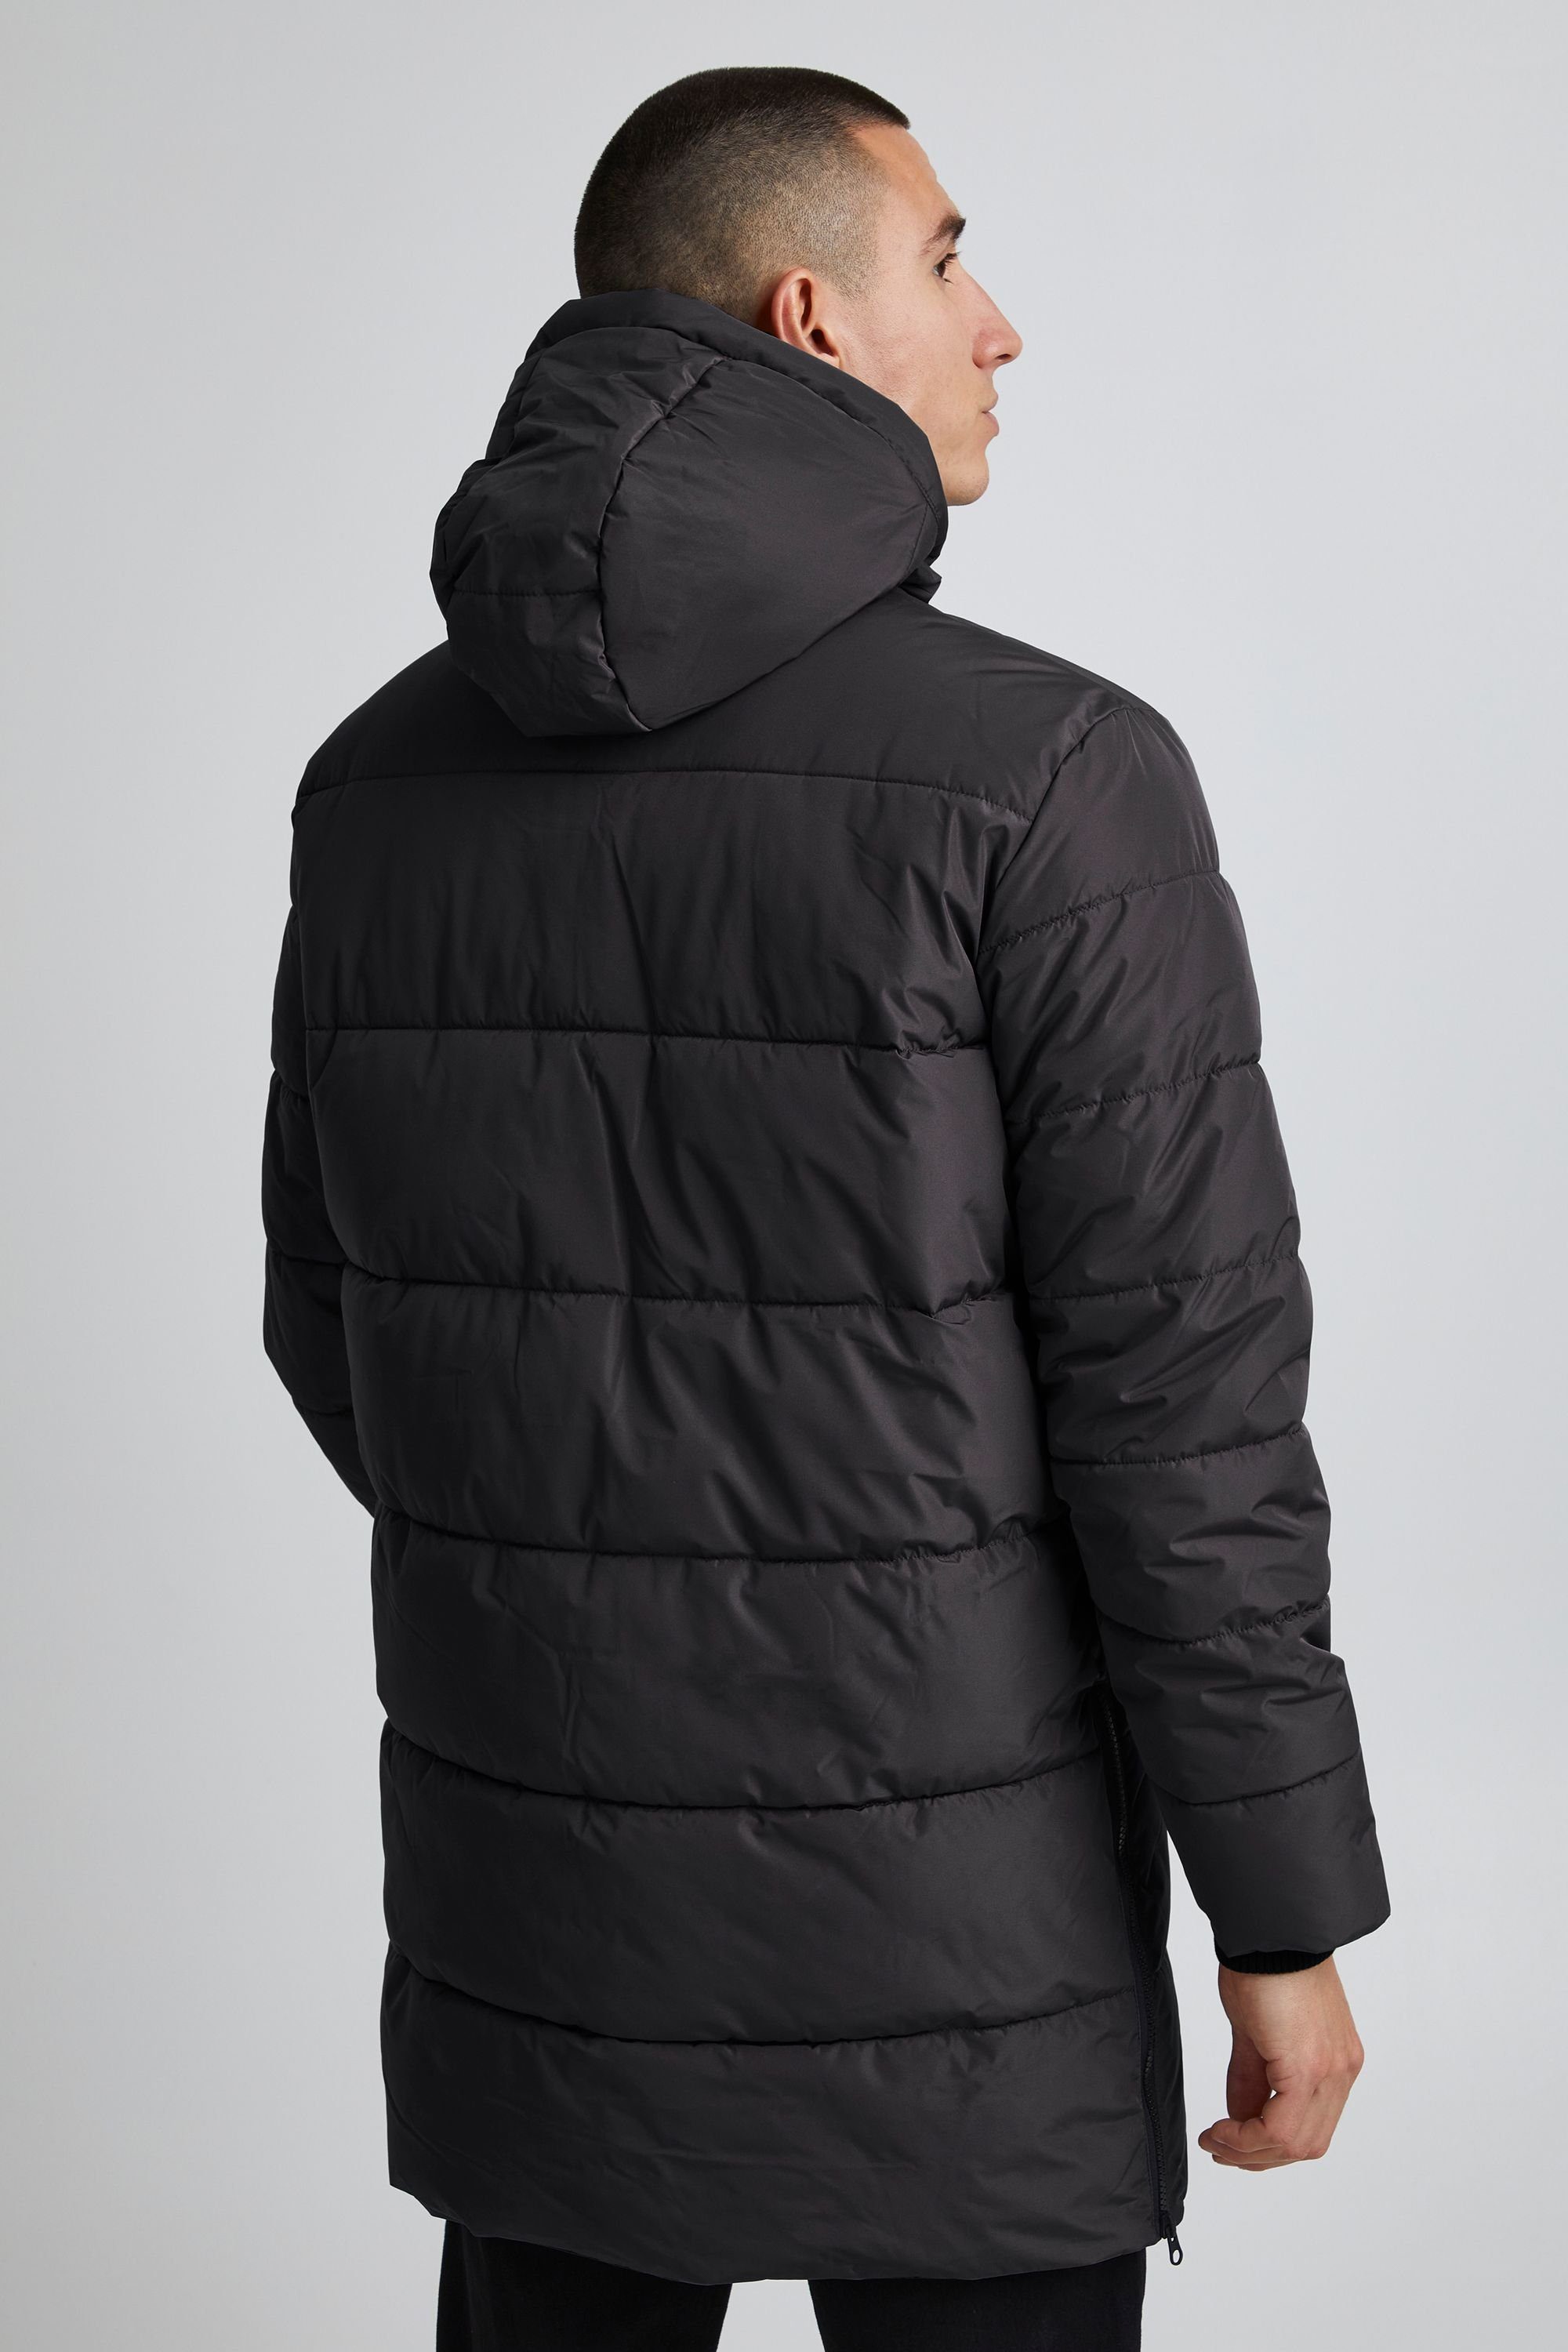 11 Iron quilted Long Project Project Gate 11 Parka Tibor Parka